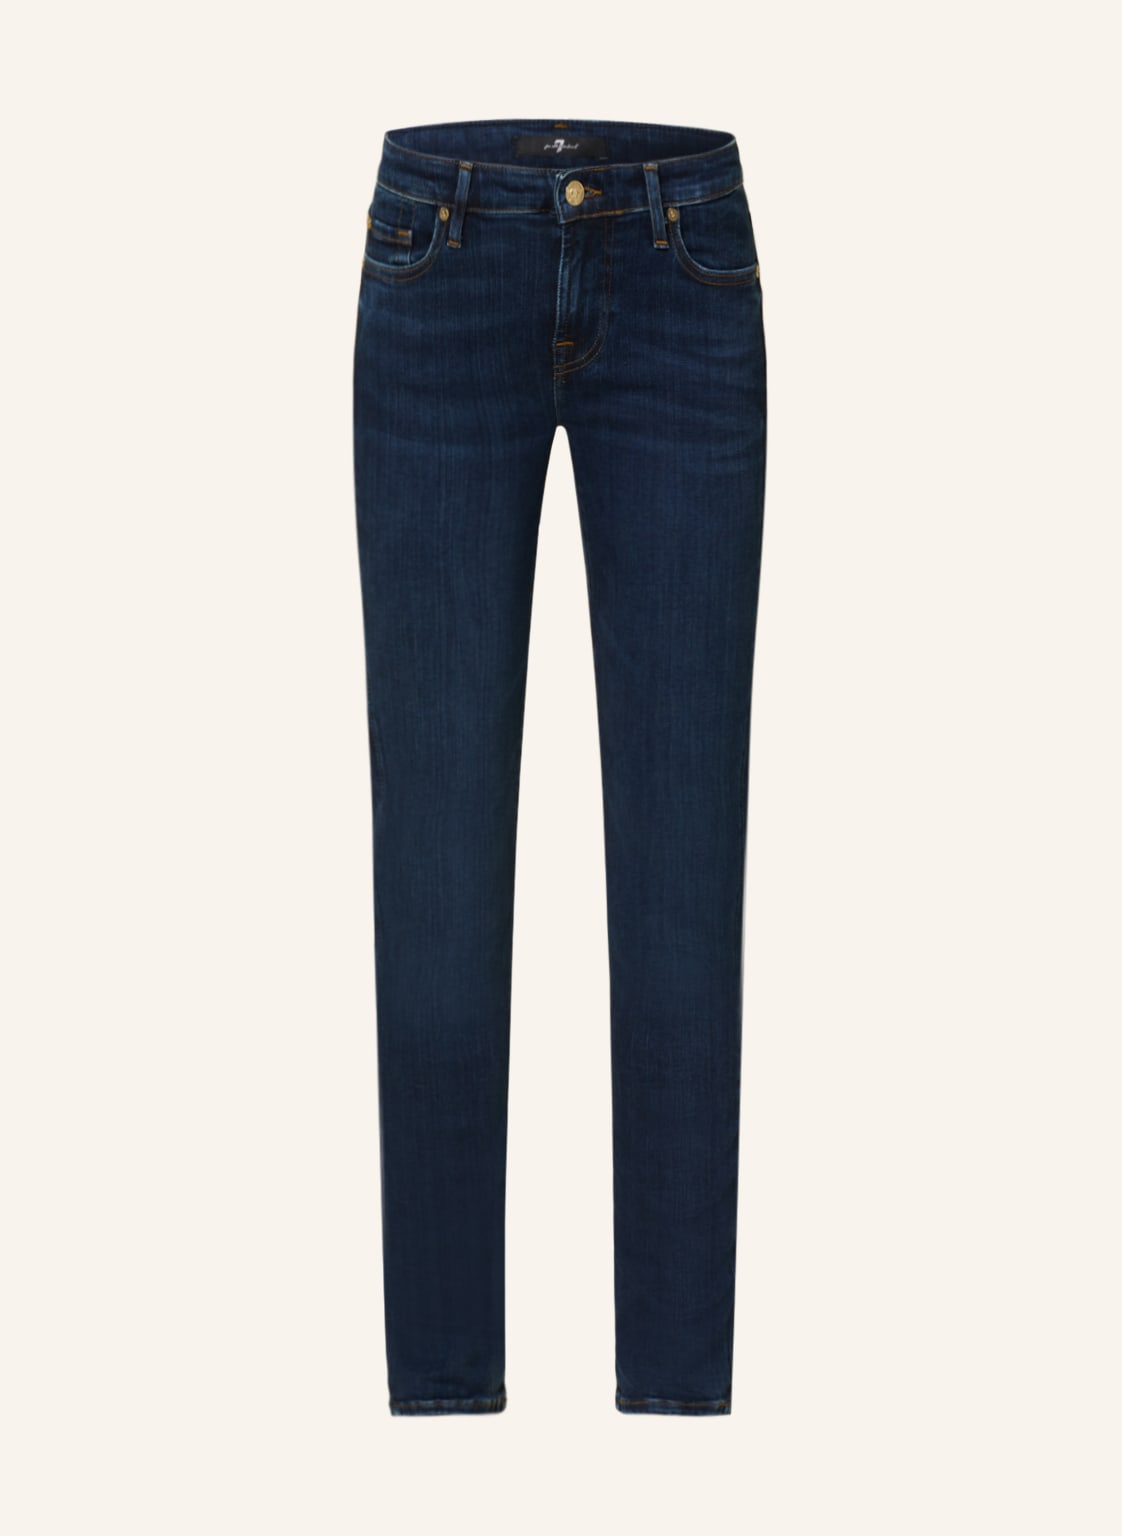 7 For All Mankind Jeans Pyper blau von 7 For All Mankind